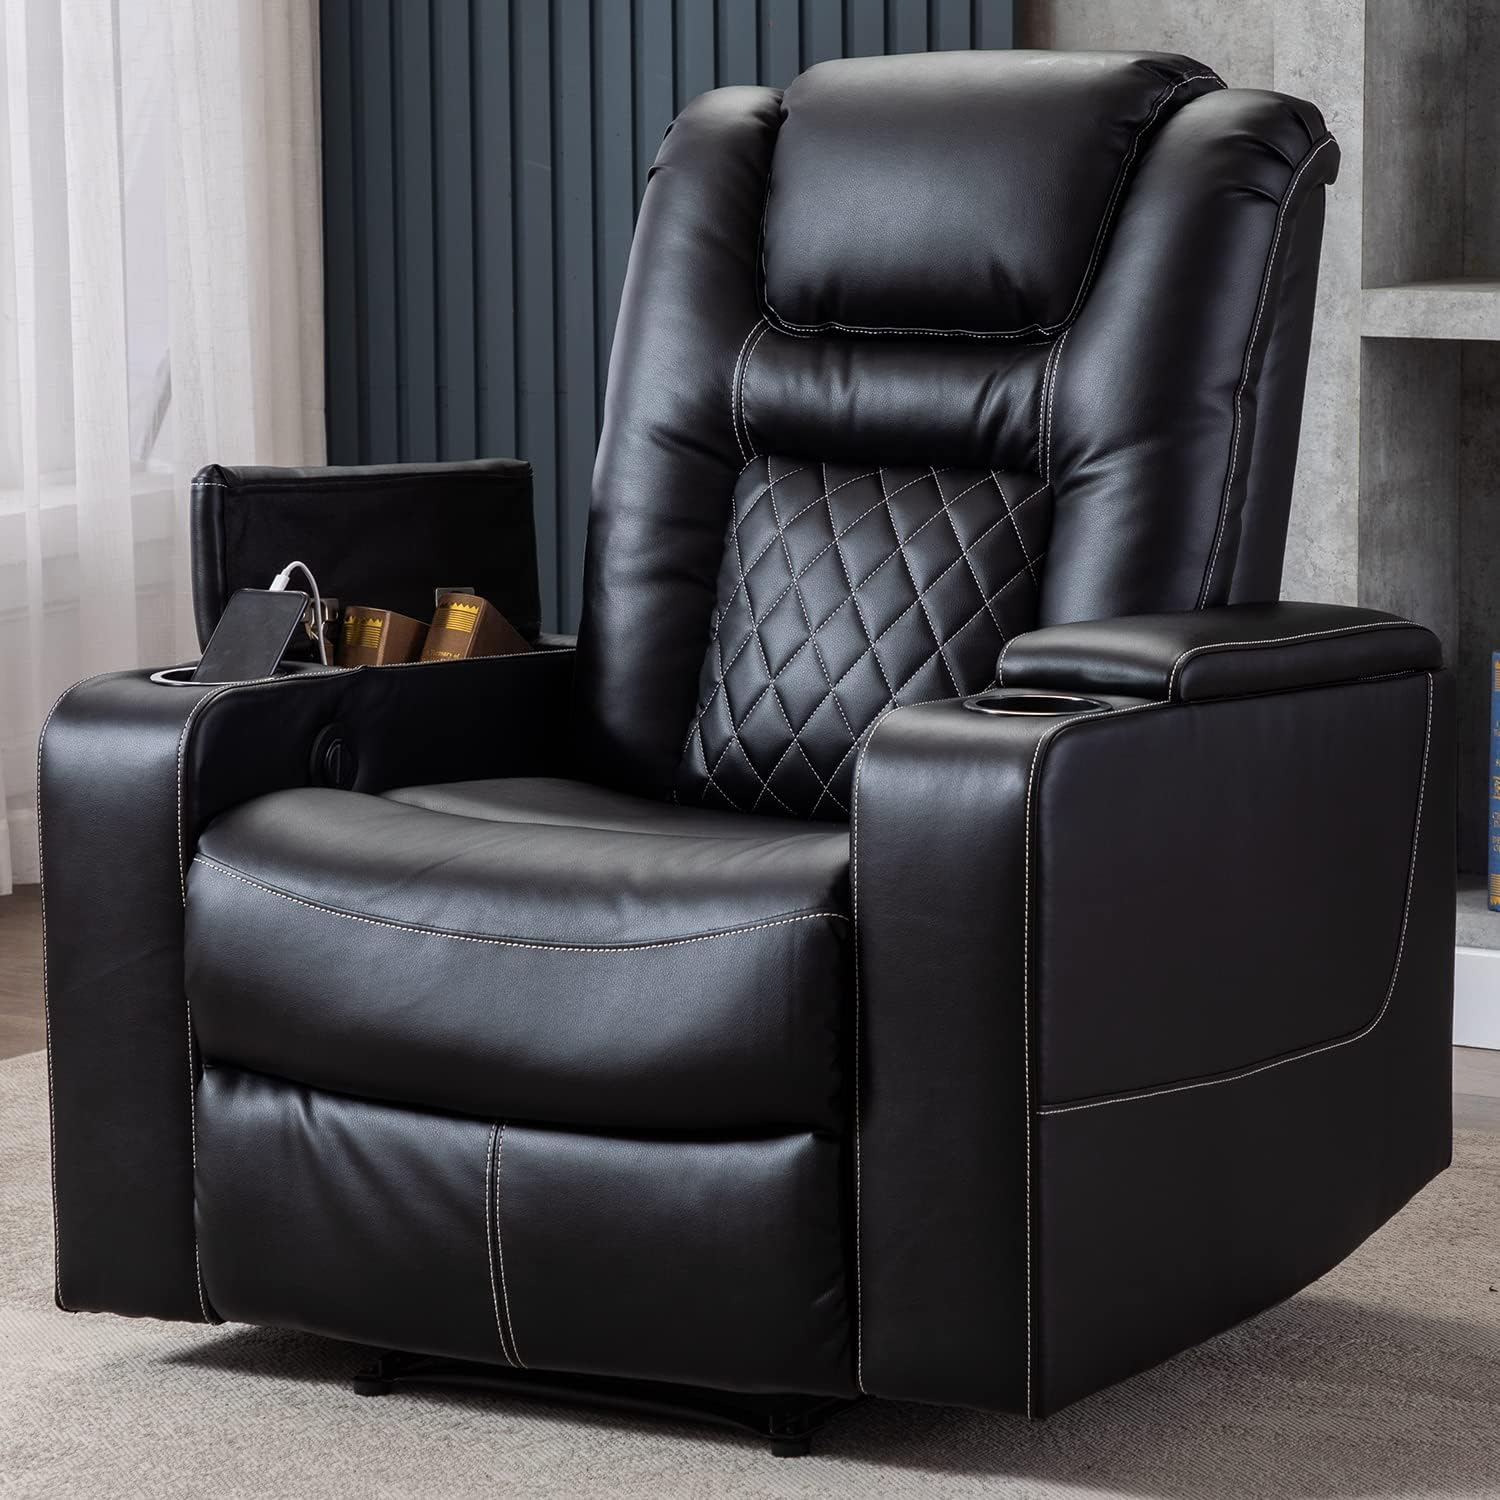 CANMOV Electric Power Recliner Chair with USB Ports [...]